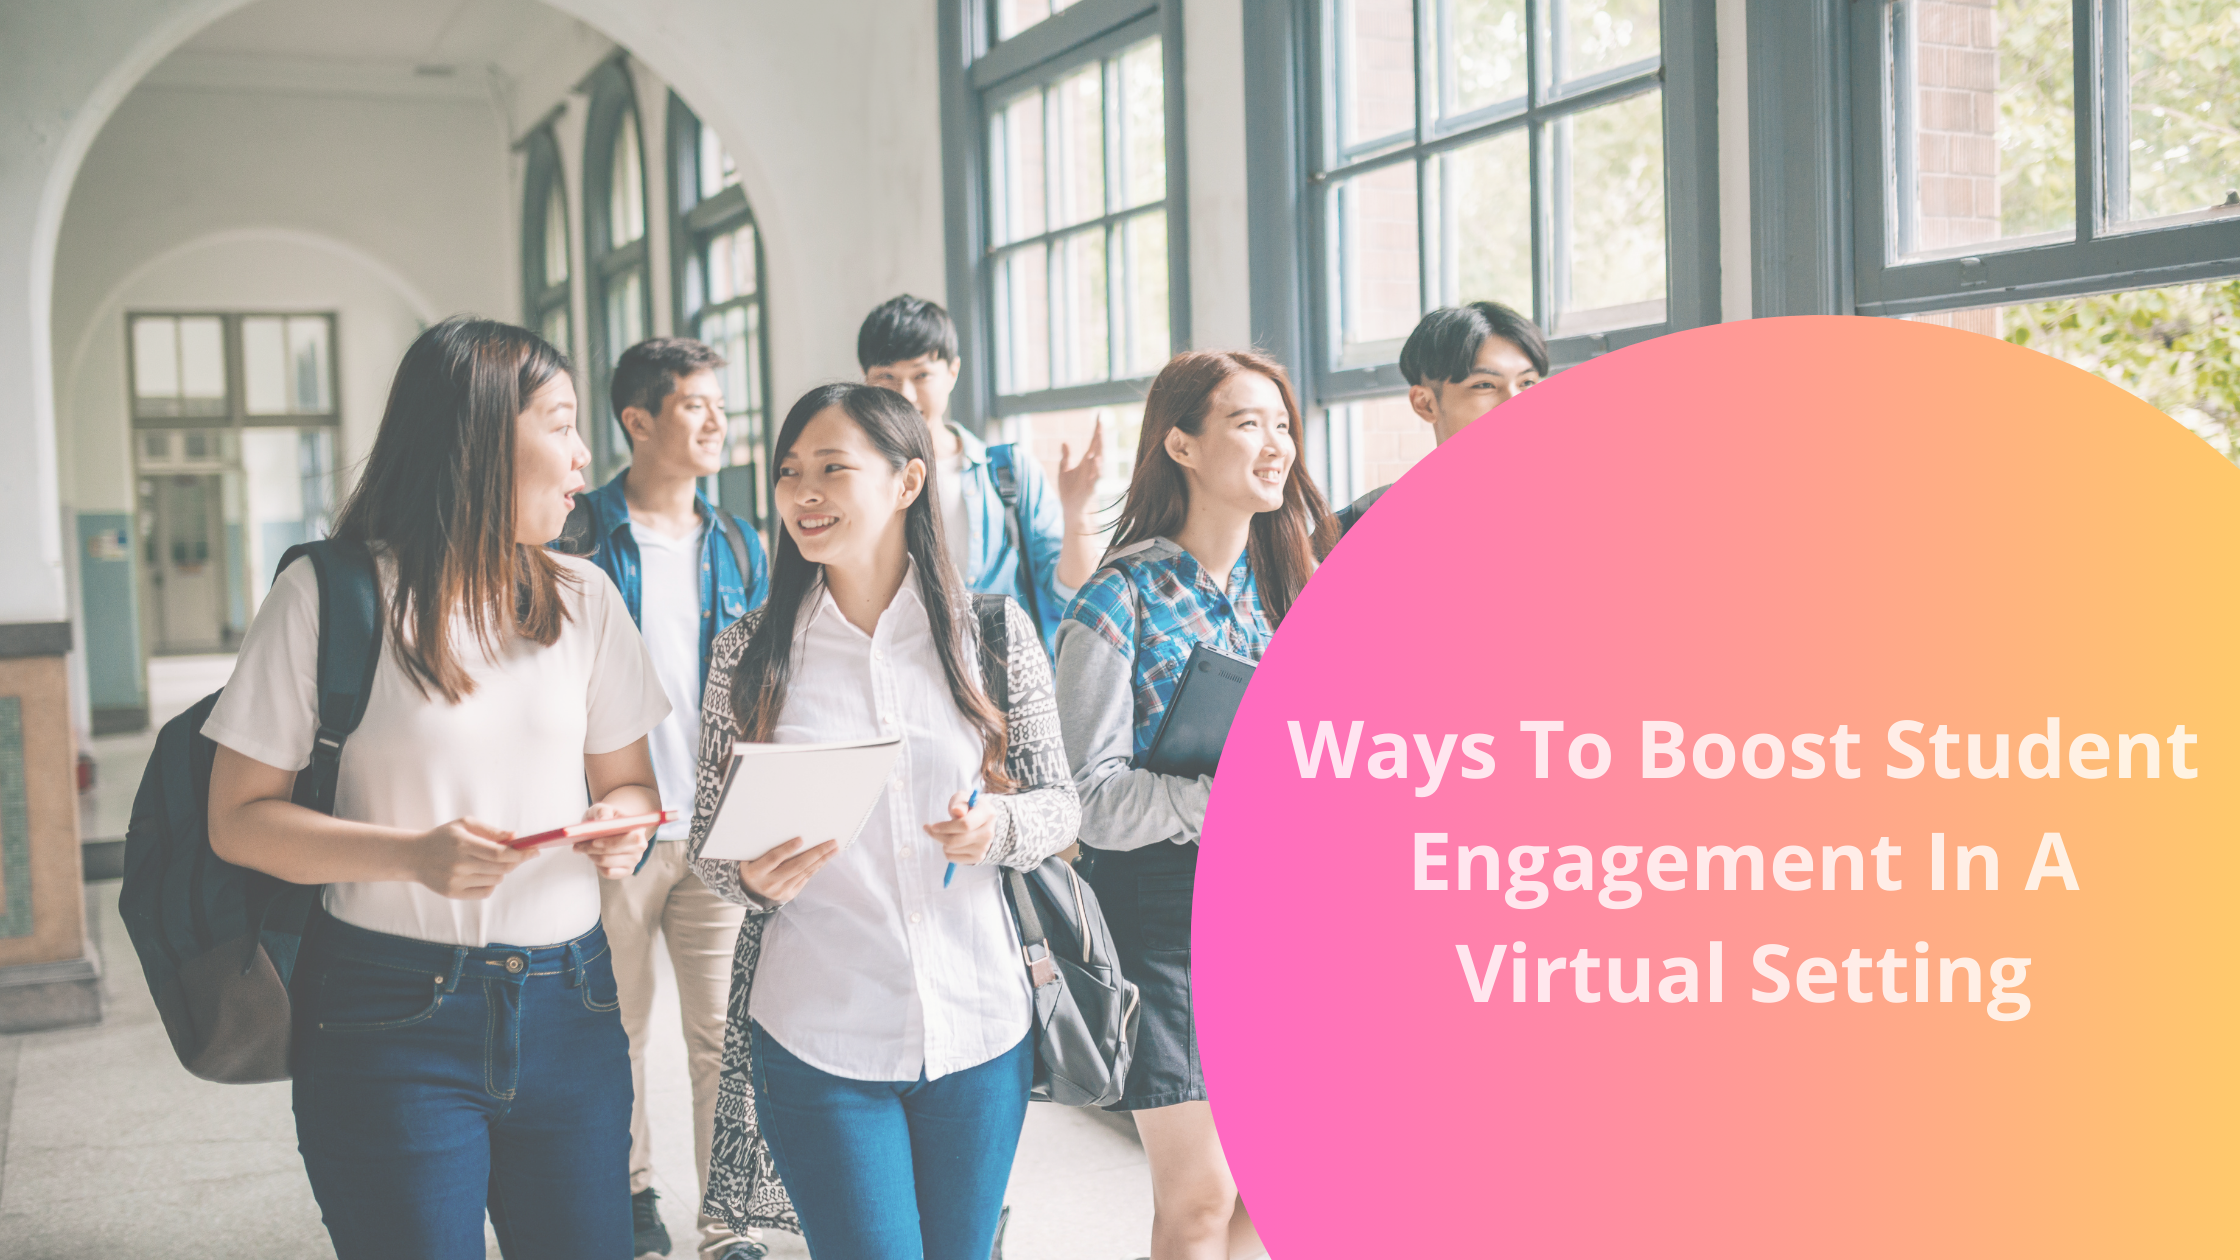 5 ways to boost student engagement in a virtual setting | bookafy